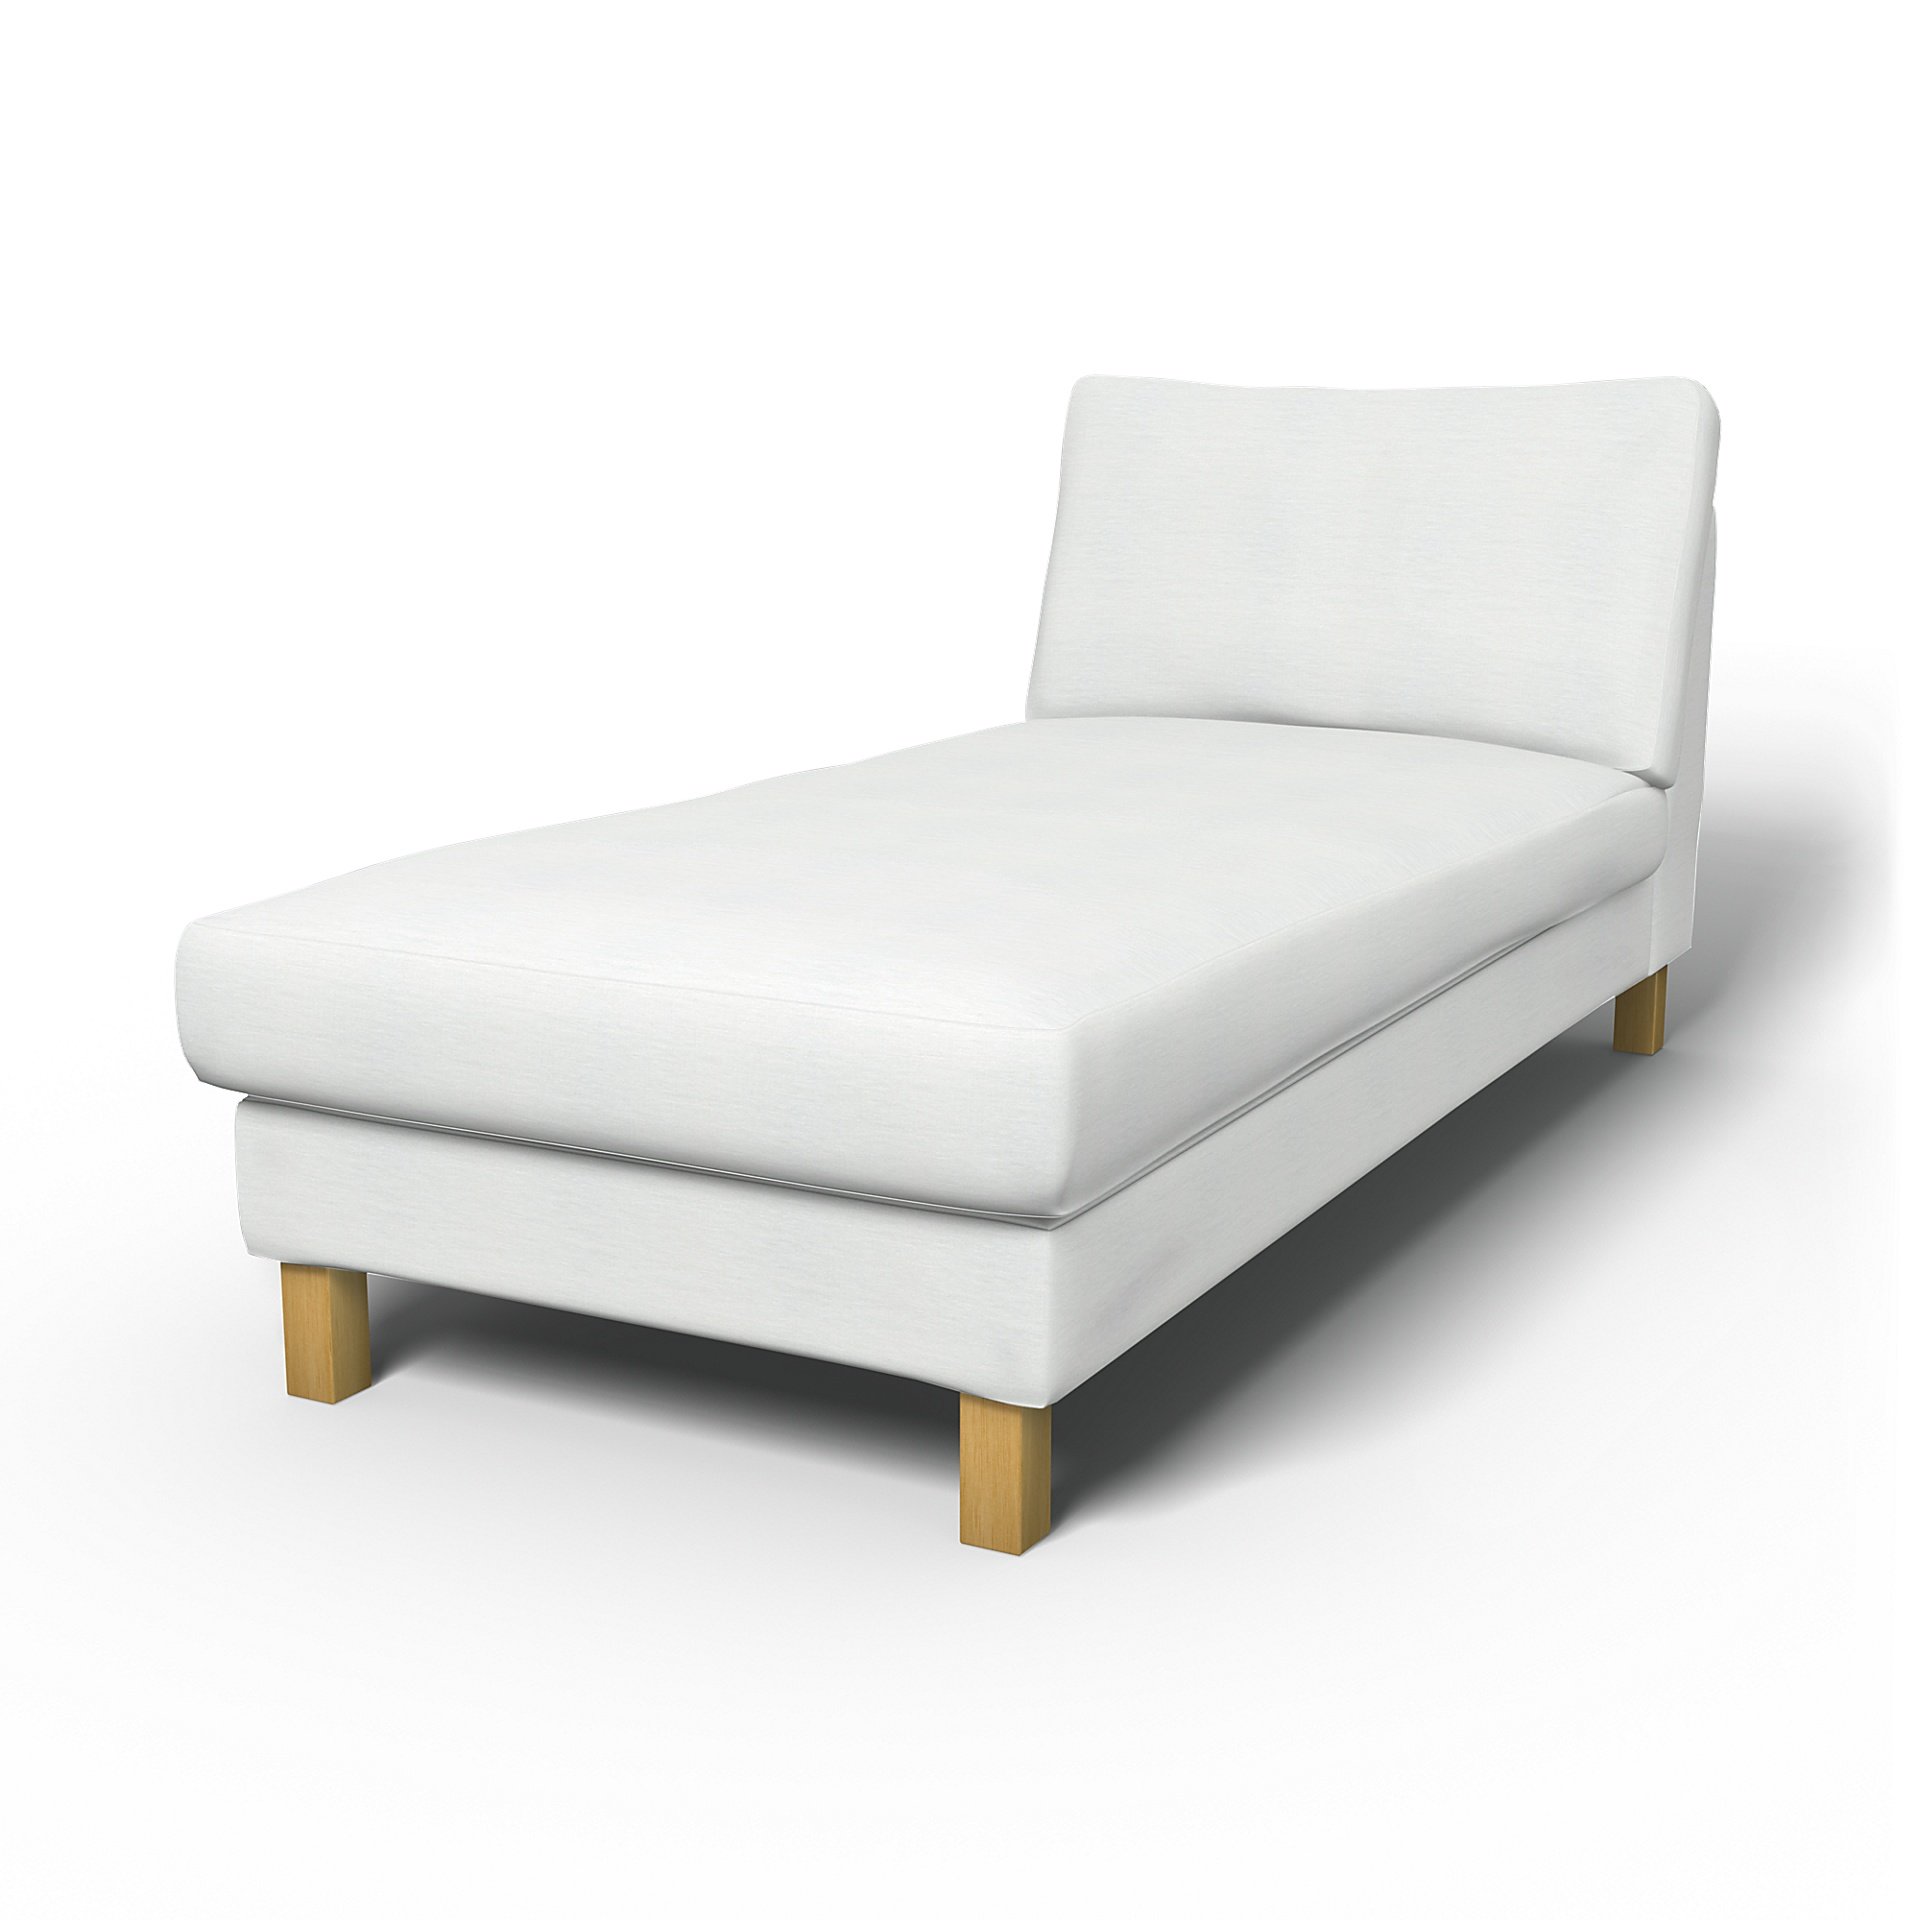 IKEA - Karlstad Stand Alone Chaise Longue Cover, White, Linen - Bemz